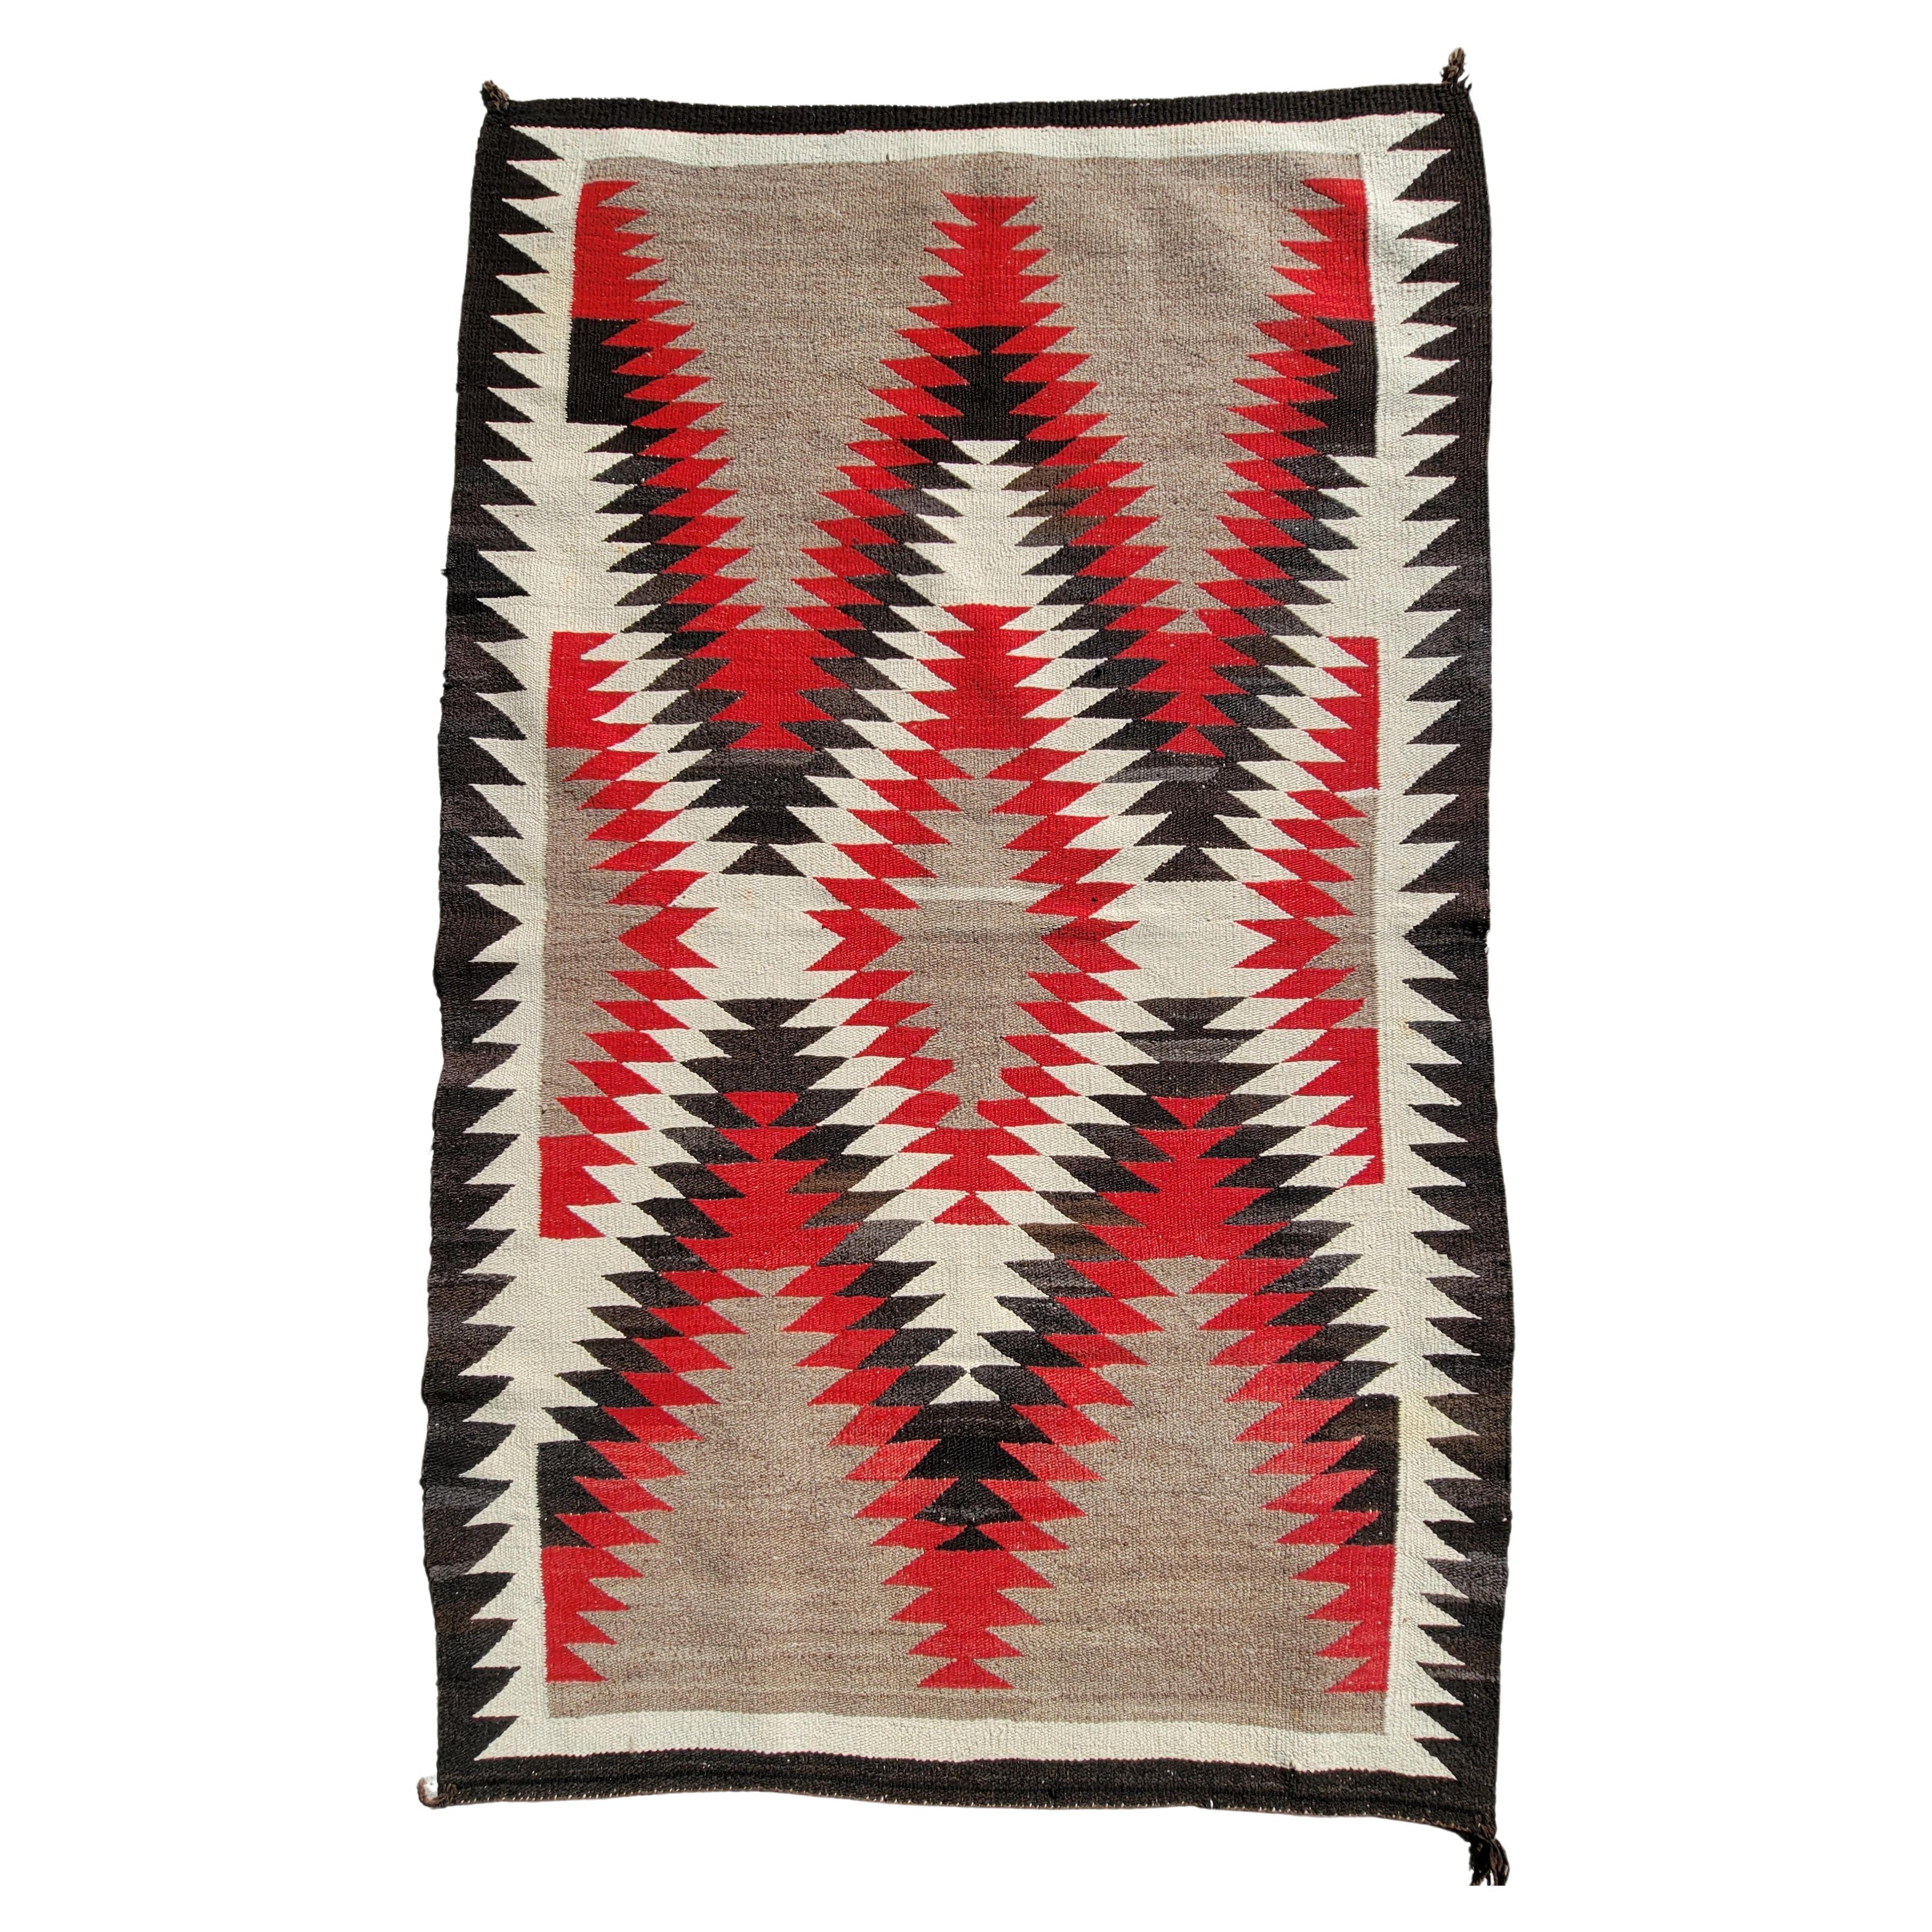 What do Navajo rugs represent?